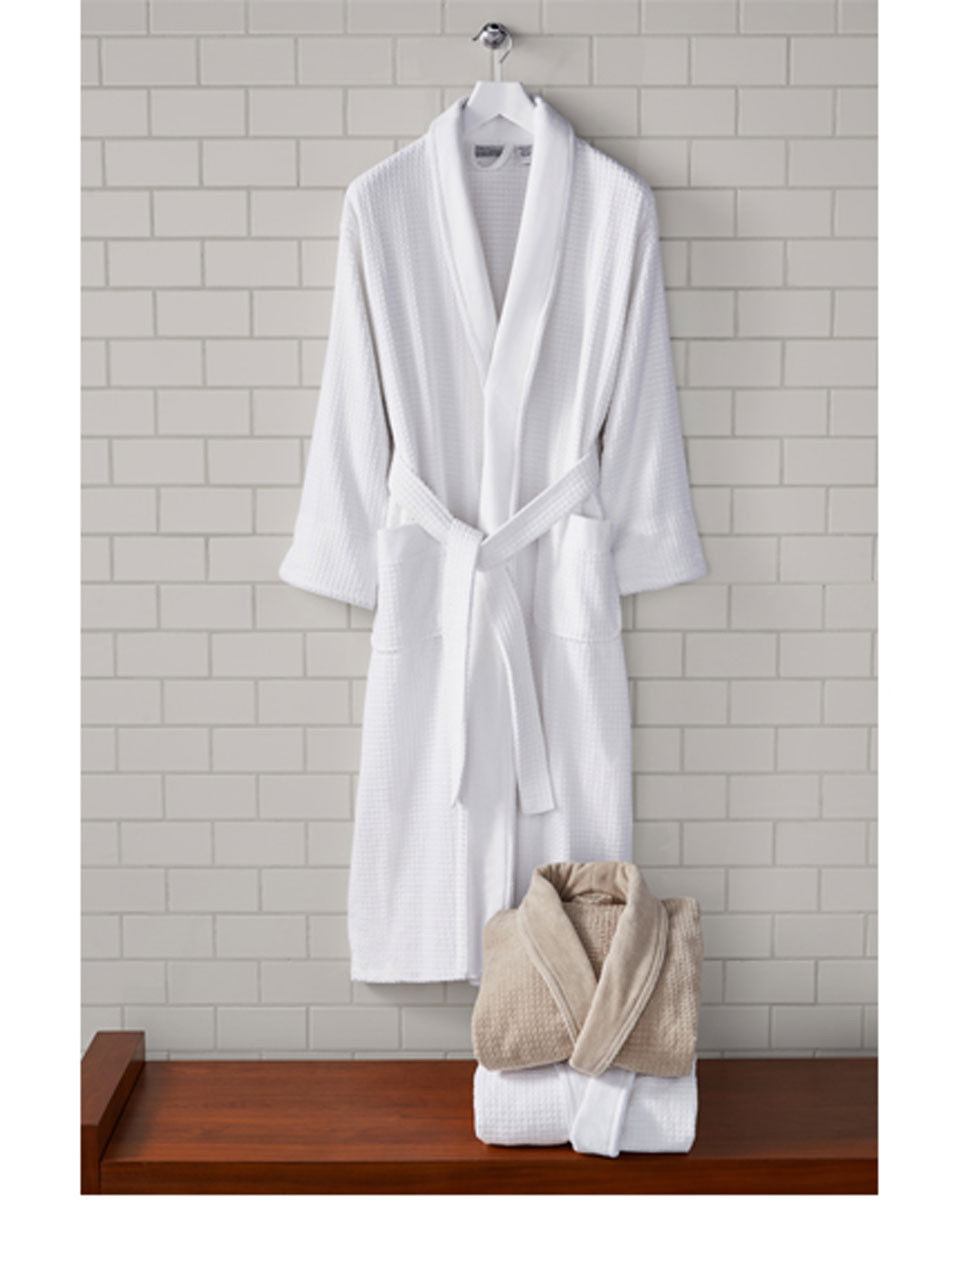 Is the 1concier robe a good match for the Platinum Shawl Collar Robe?